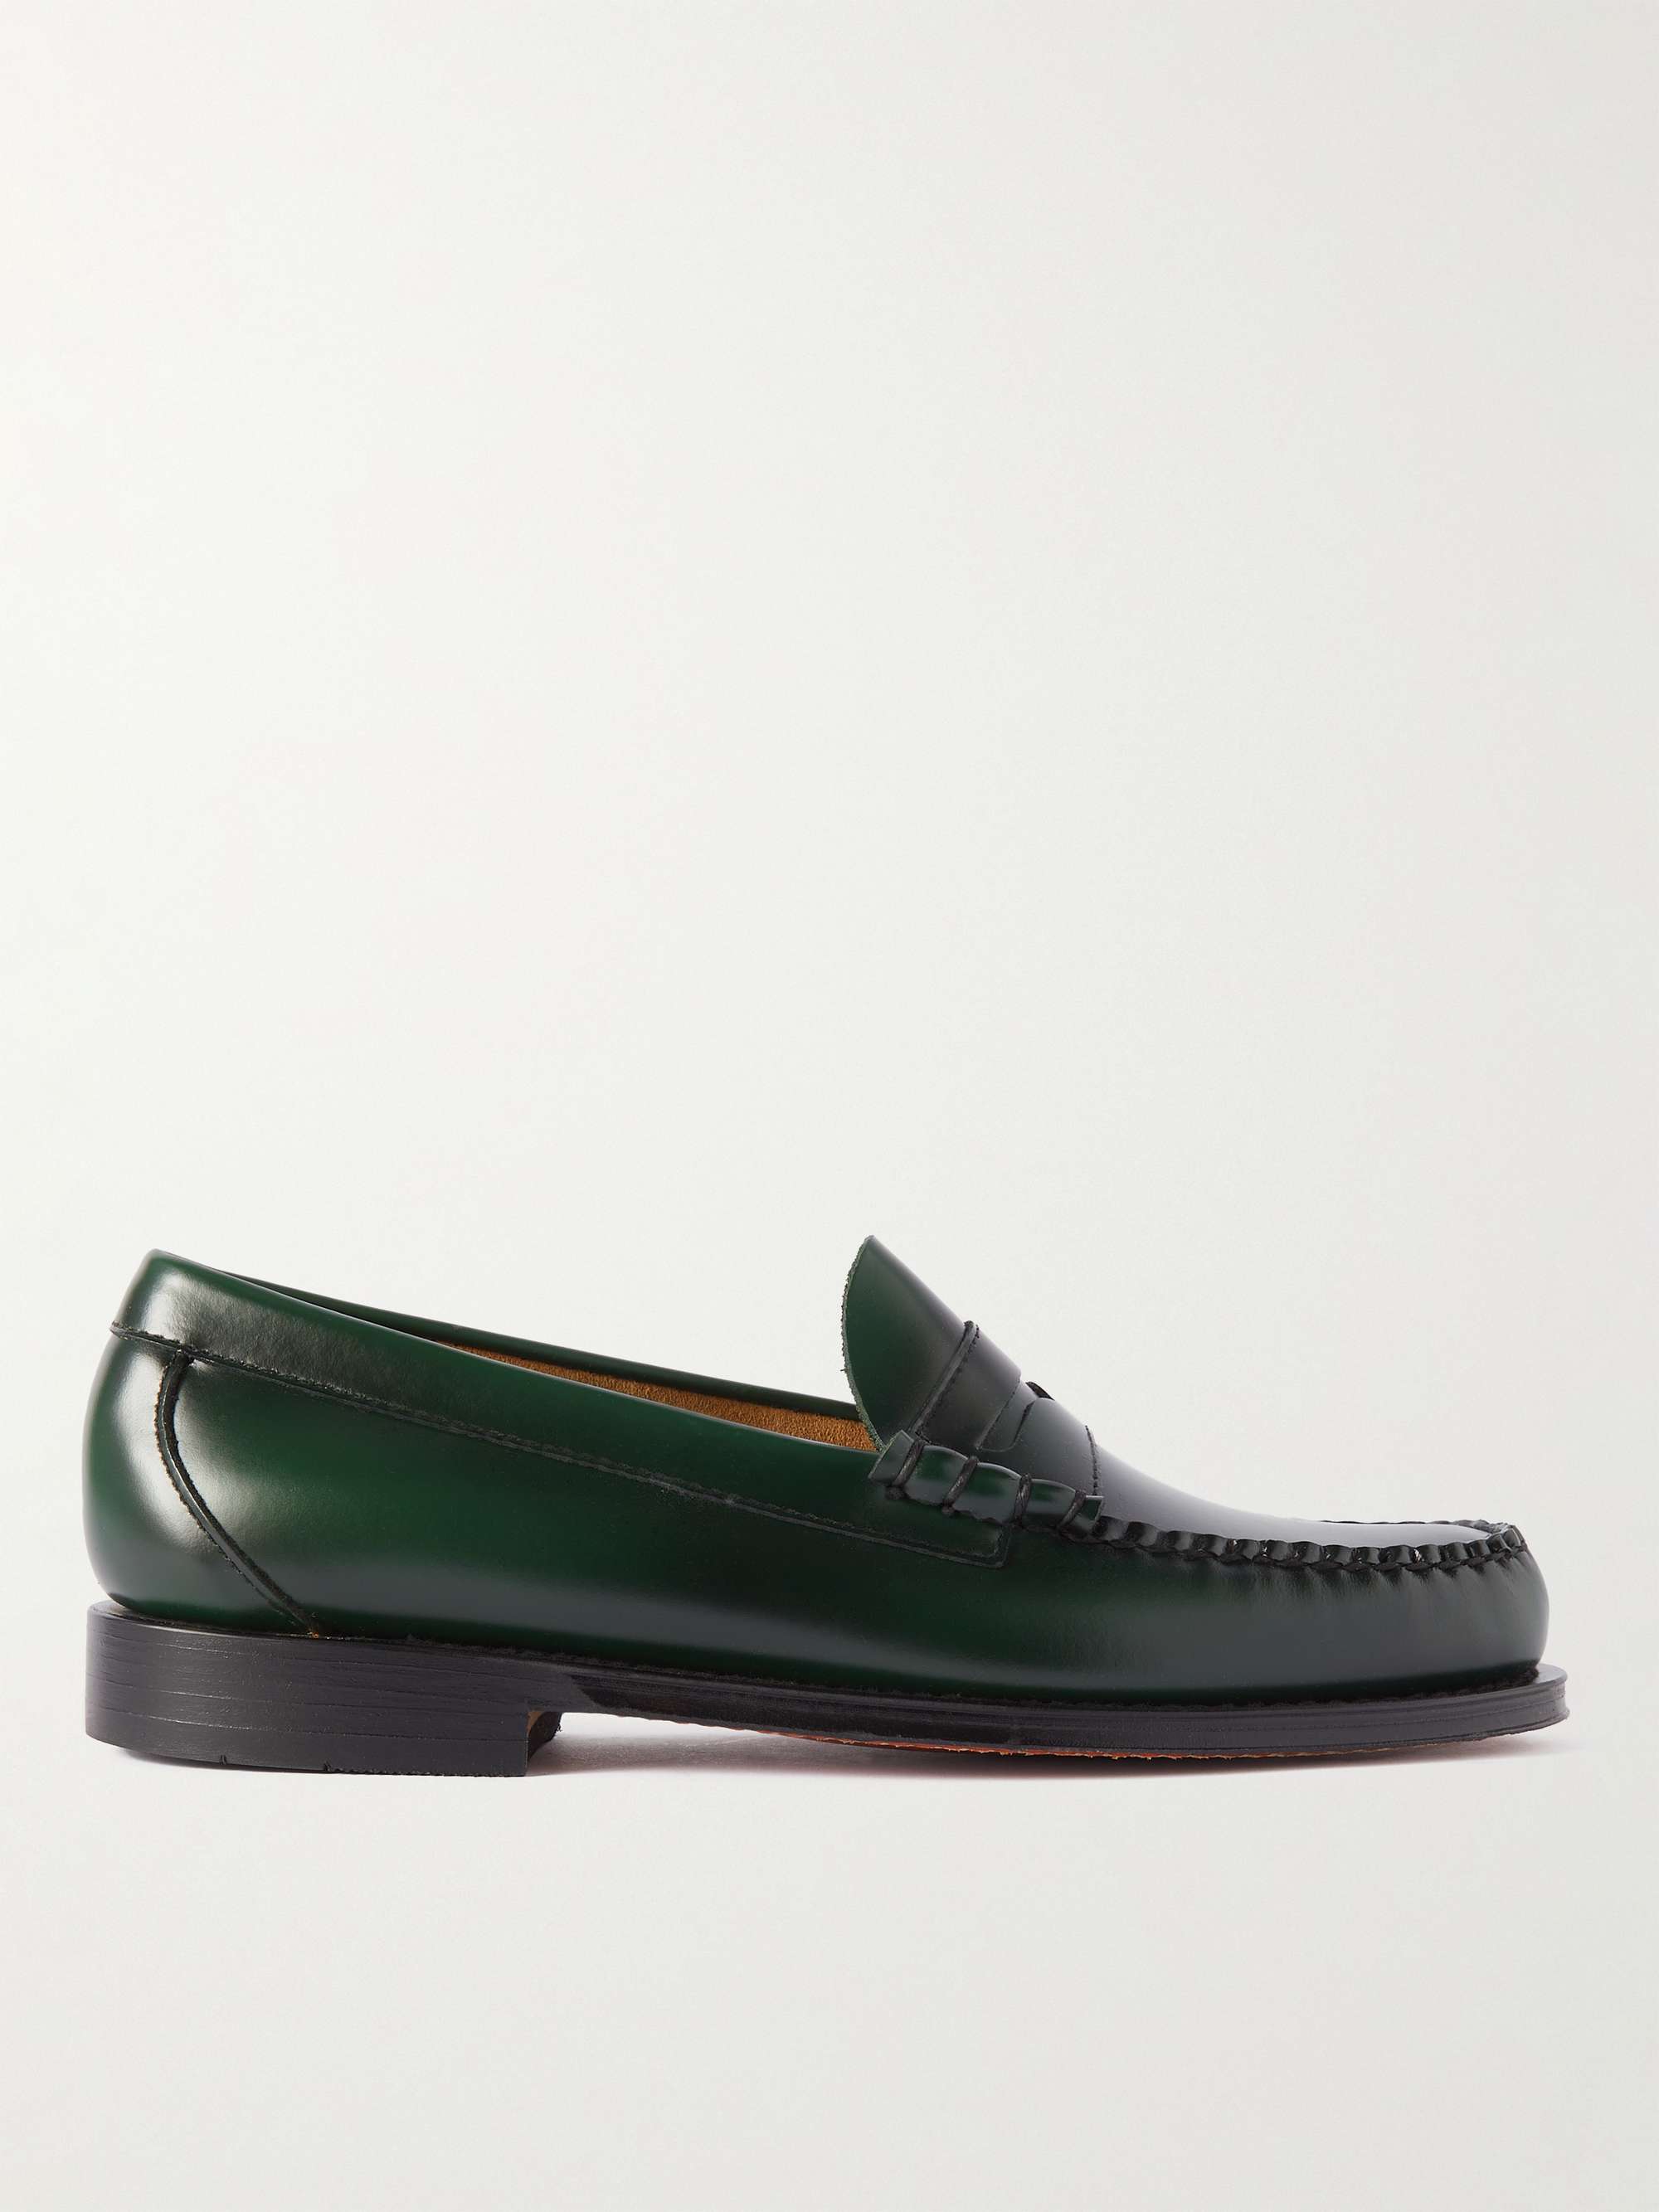 G.H. BASS & CO. Weejuns Heritage Larson Leather Penny Loafers